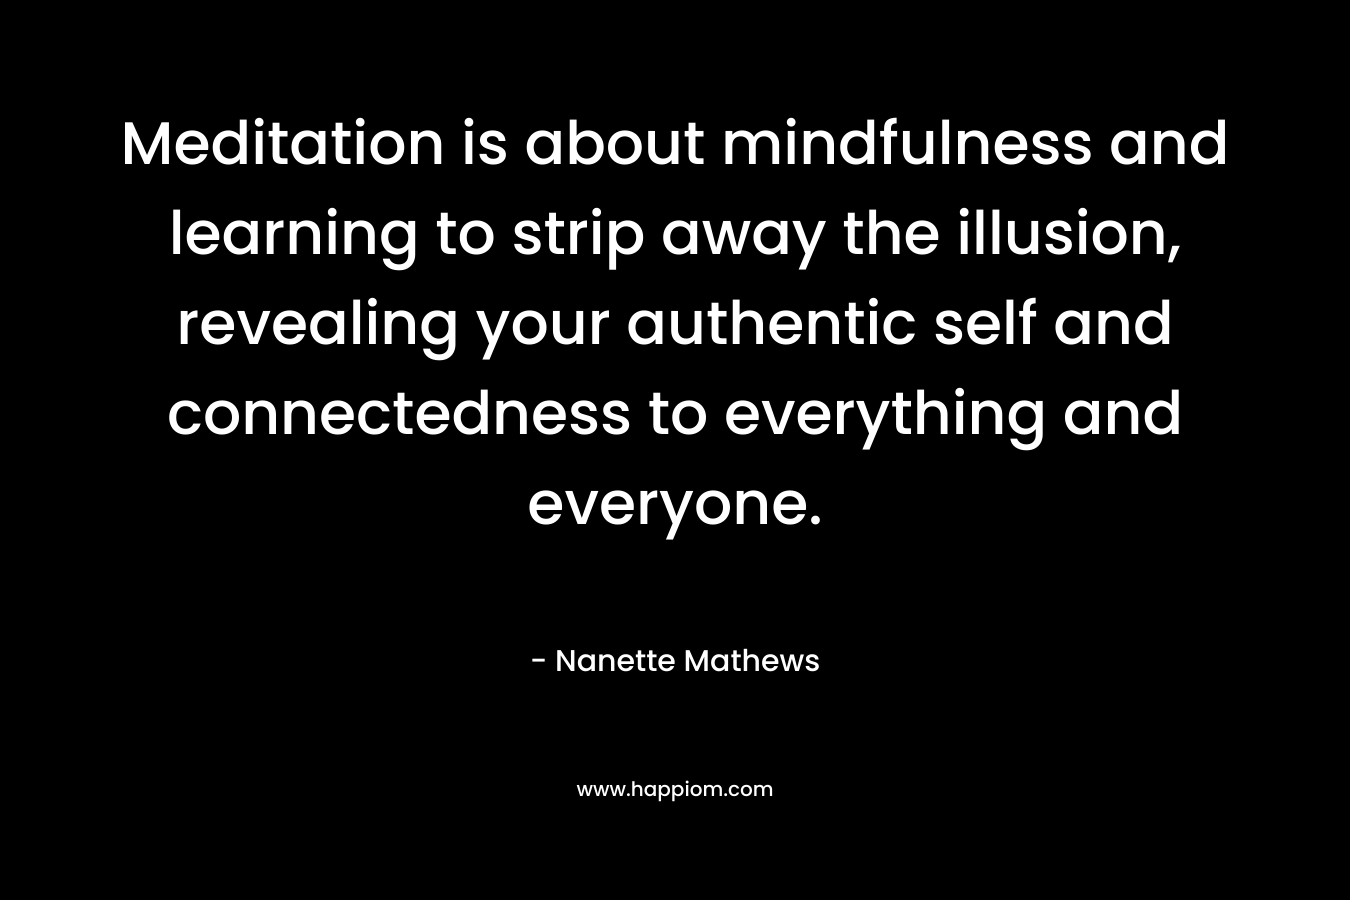 Meditation is about mindfulness and learning to strip away the illusion, revealing your authentic self and connectedness to everything and everyone.